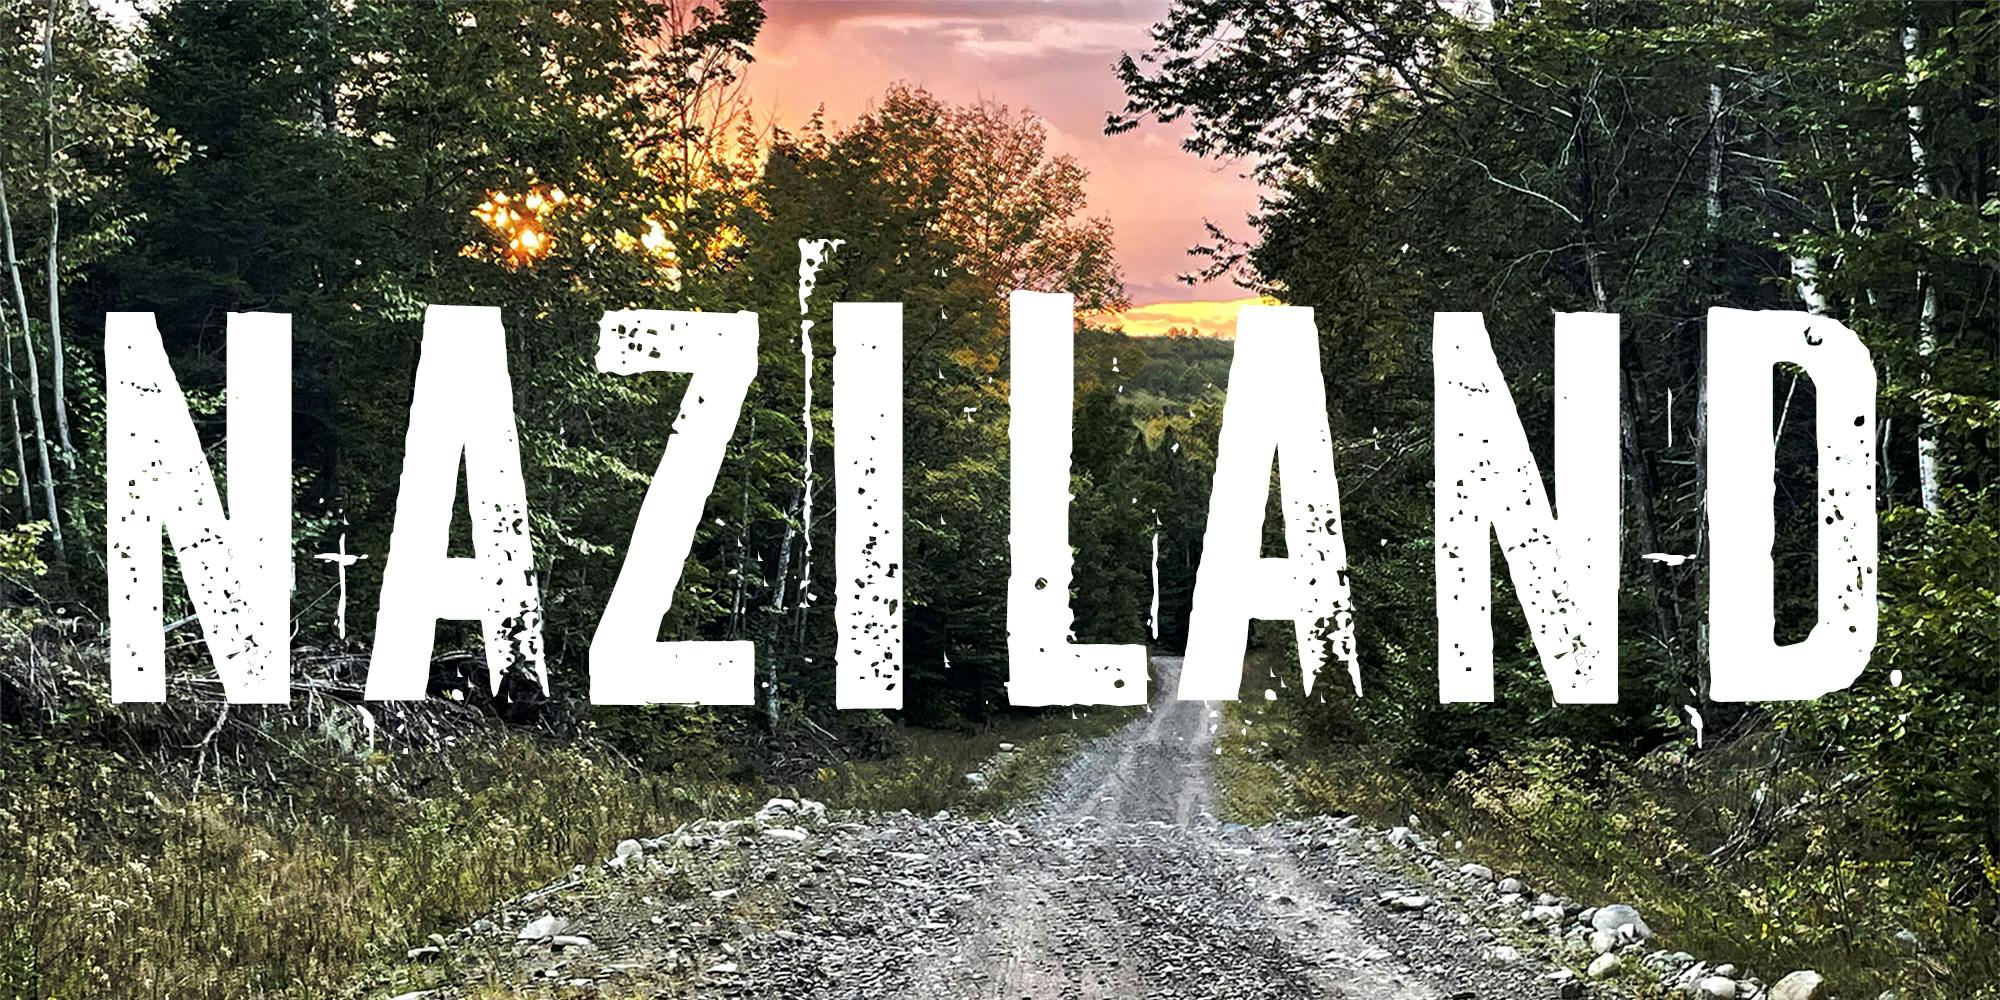 NAZILAND logo over wooded dirt road